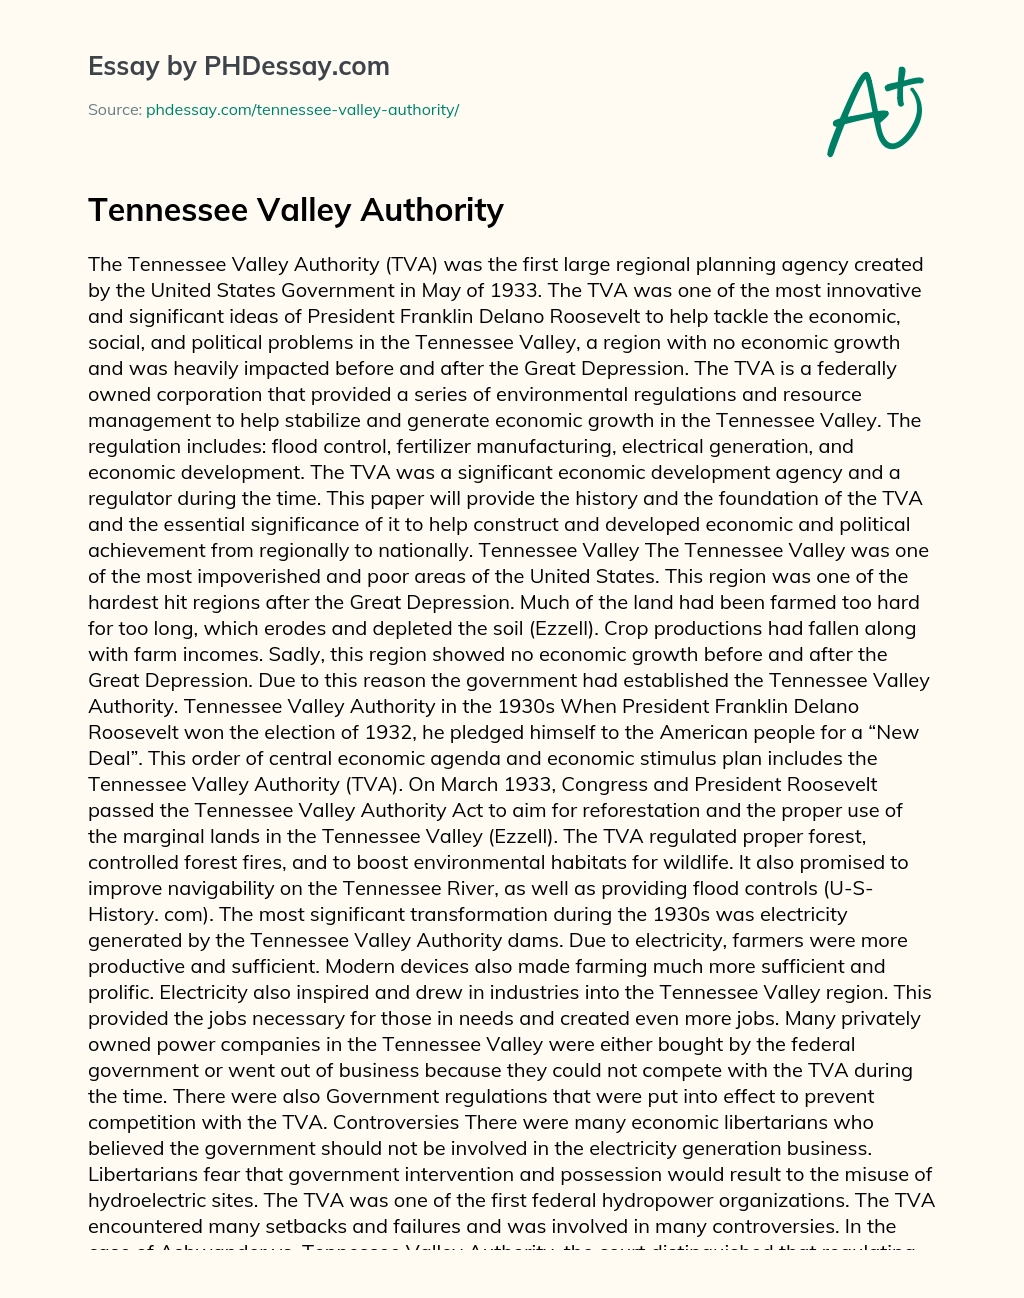 Tennessee Valley Authority essay